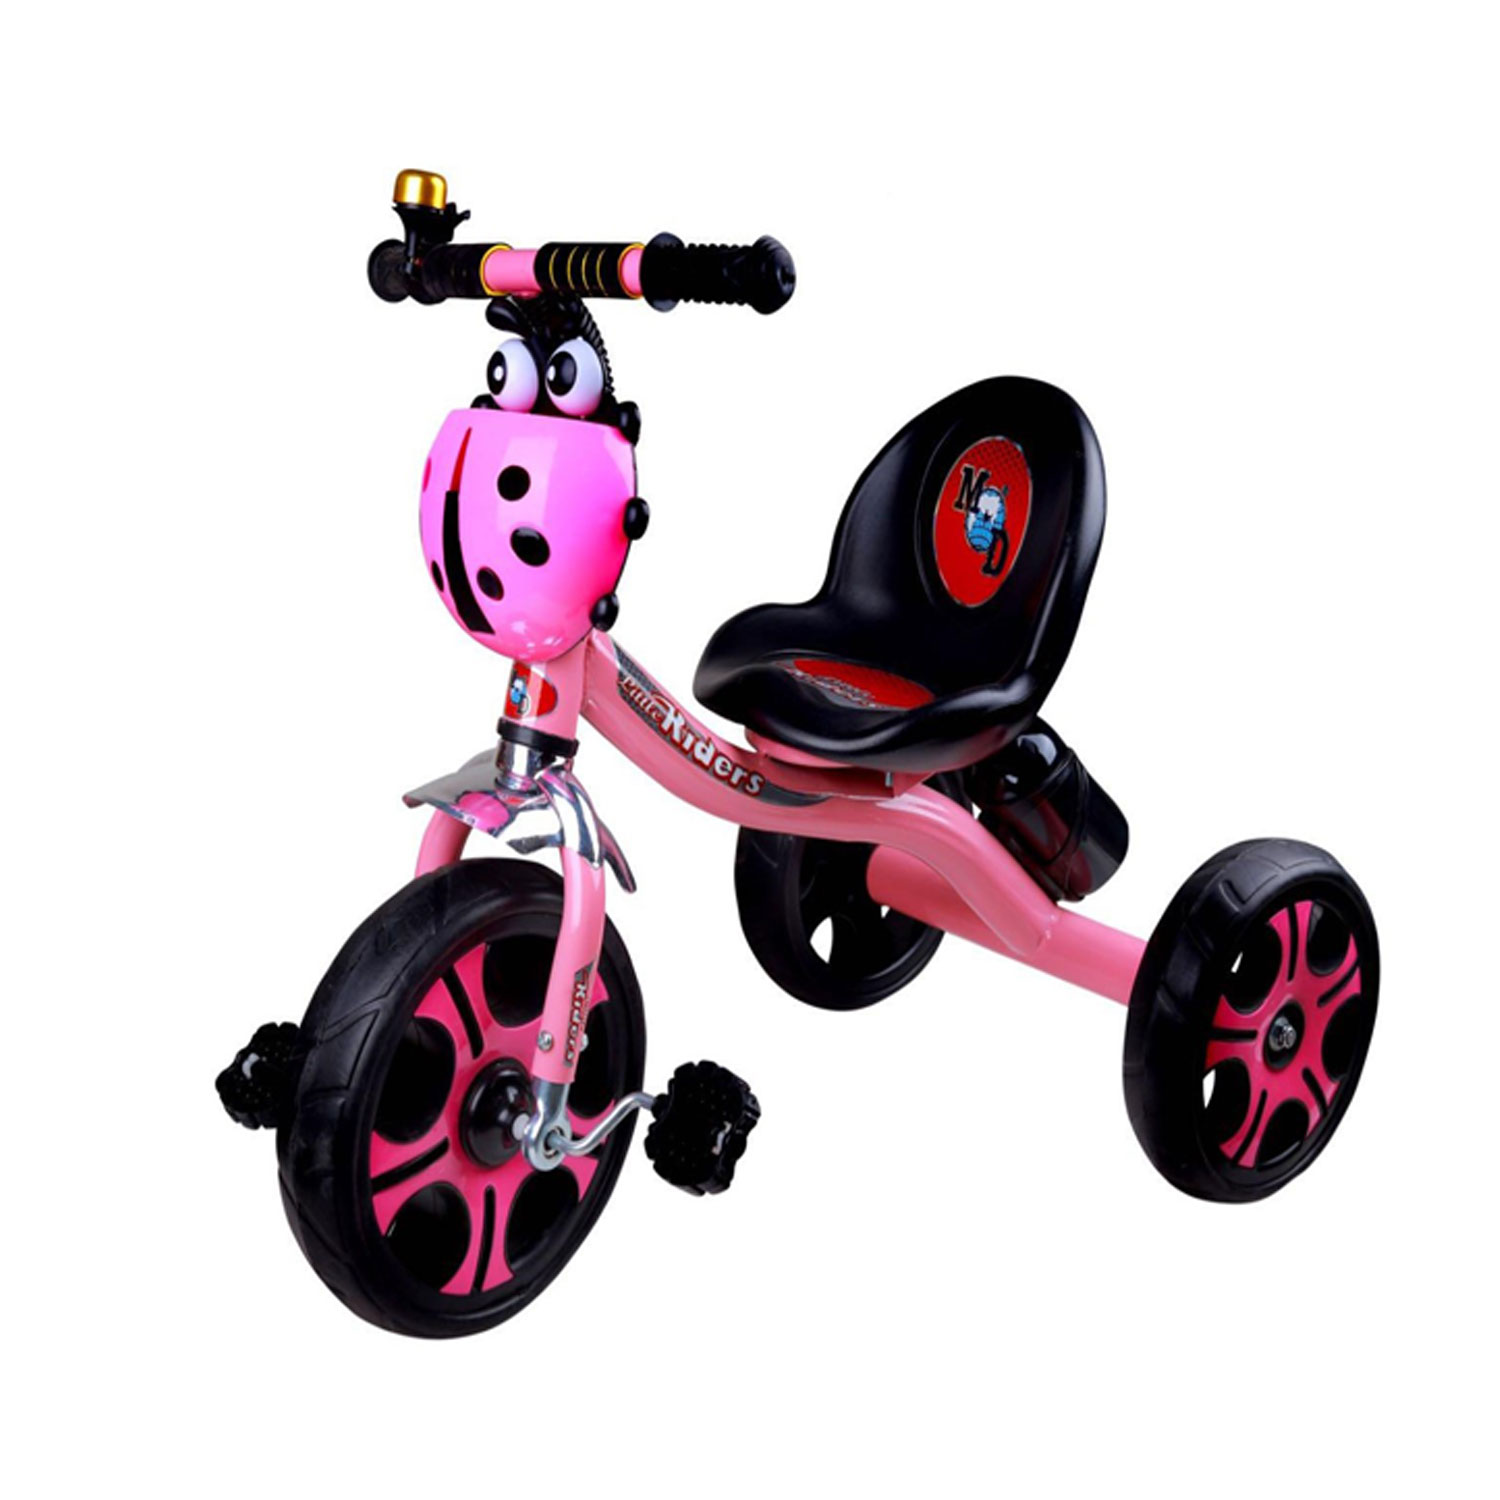 NAVRANGI BABY TRICYCLE FOR KIDS WITH FRONT OR BACK BASKET AND PARENT HANDLE. TRICYCLE FOR KIDS KBQ-175 